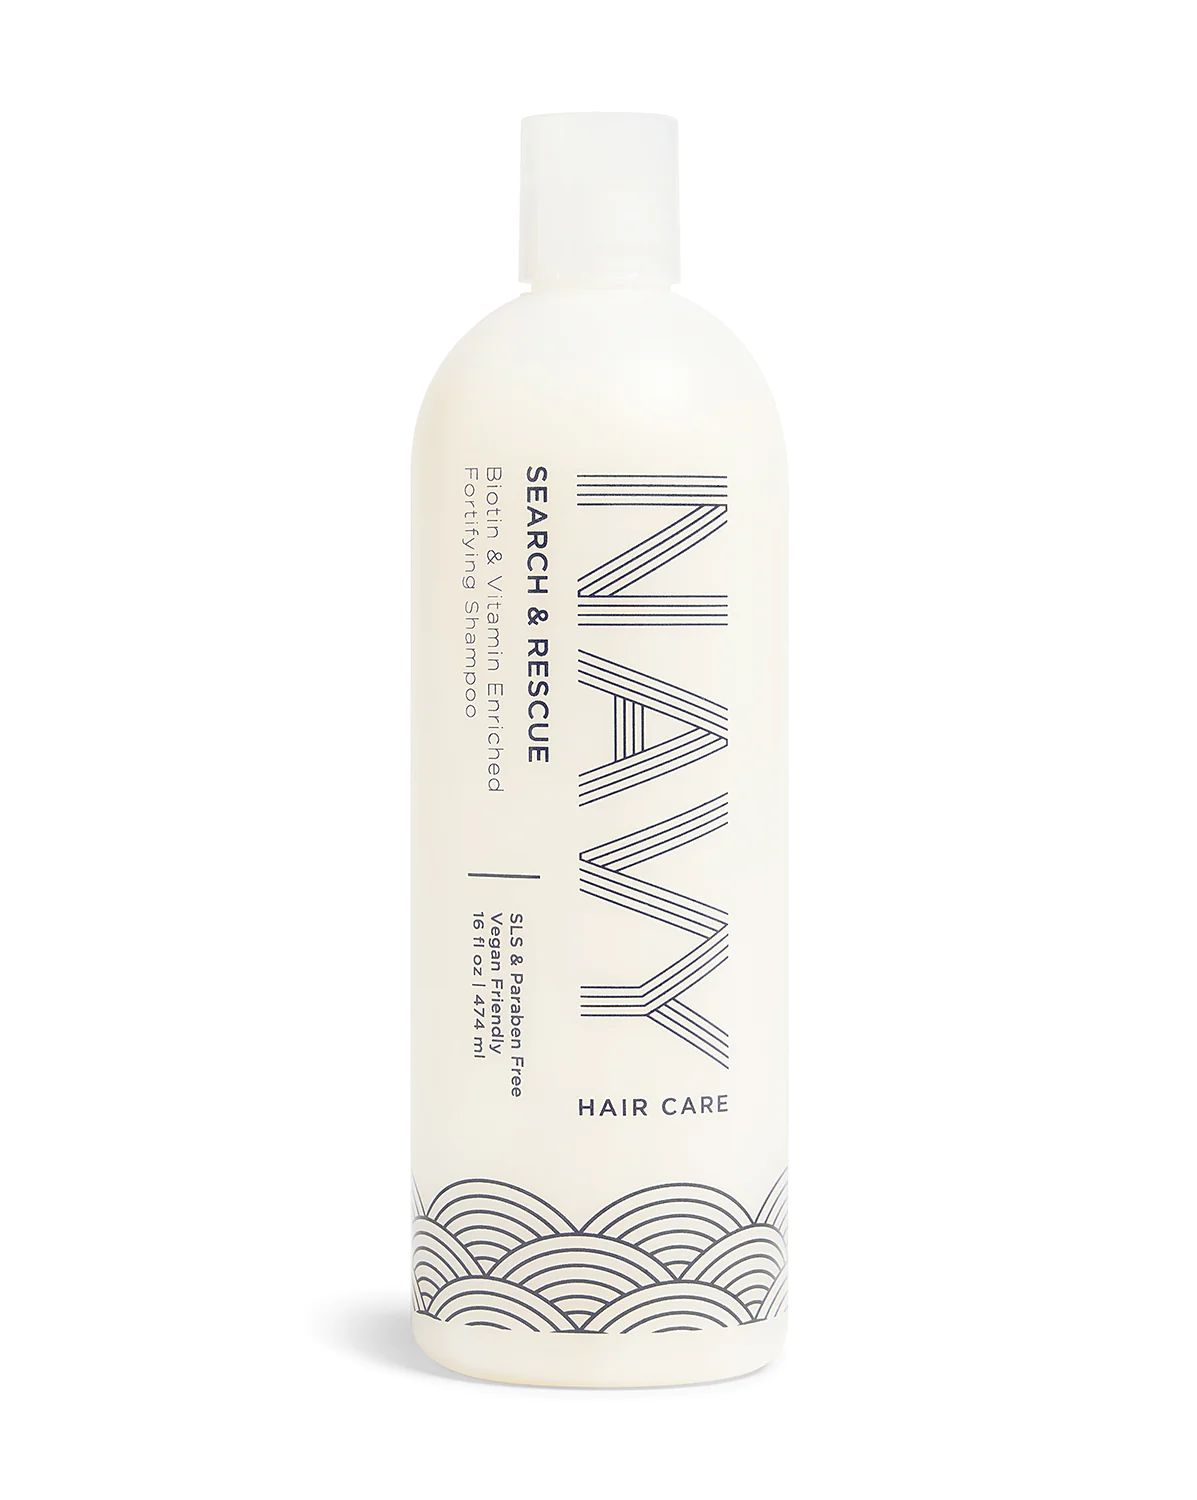 Search and Rescue Shampoo | NAVY Hair Care